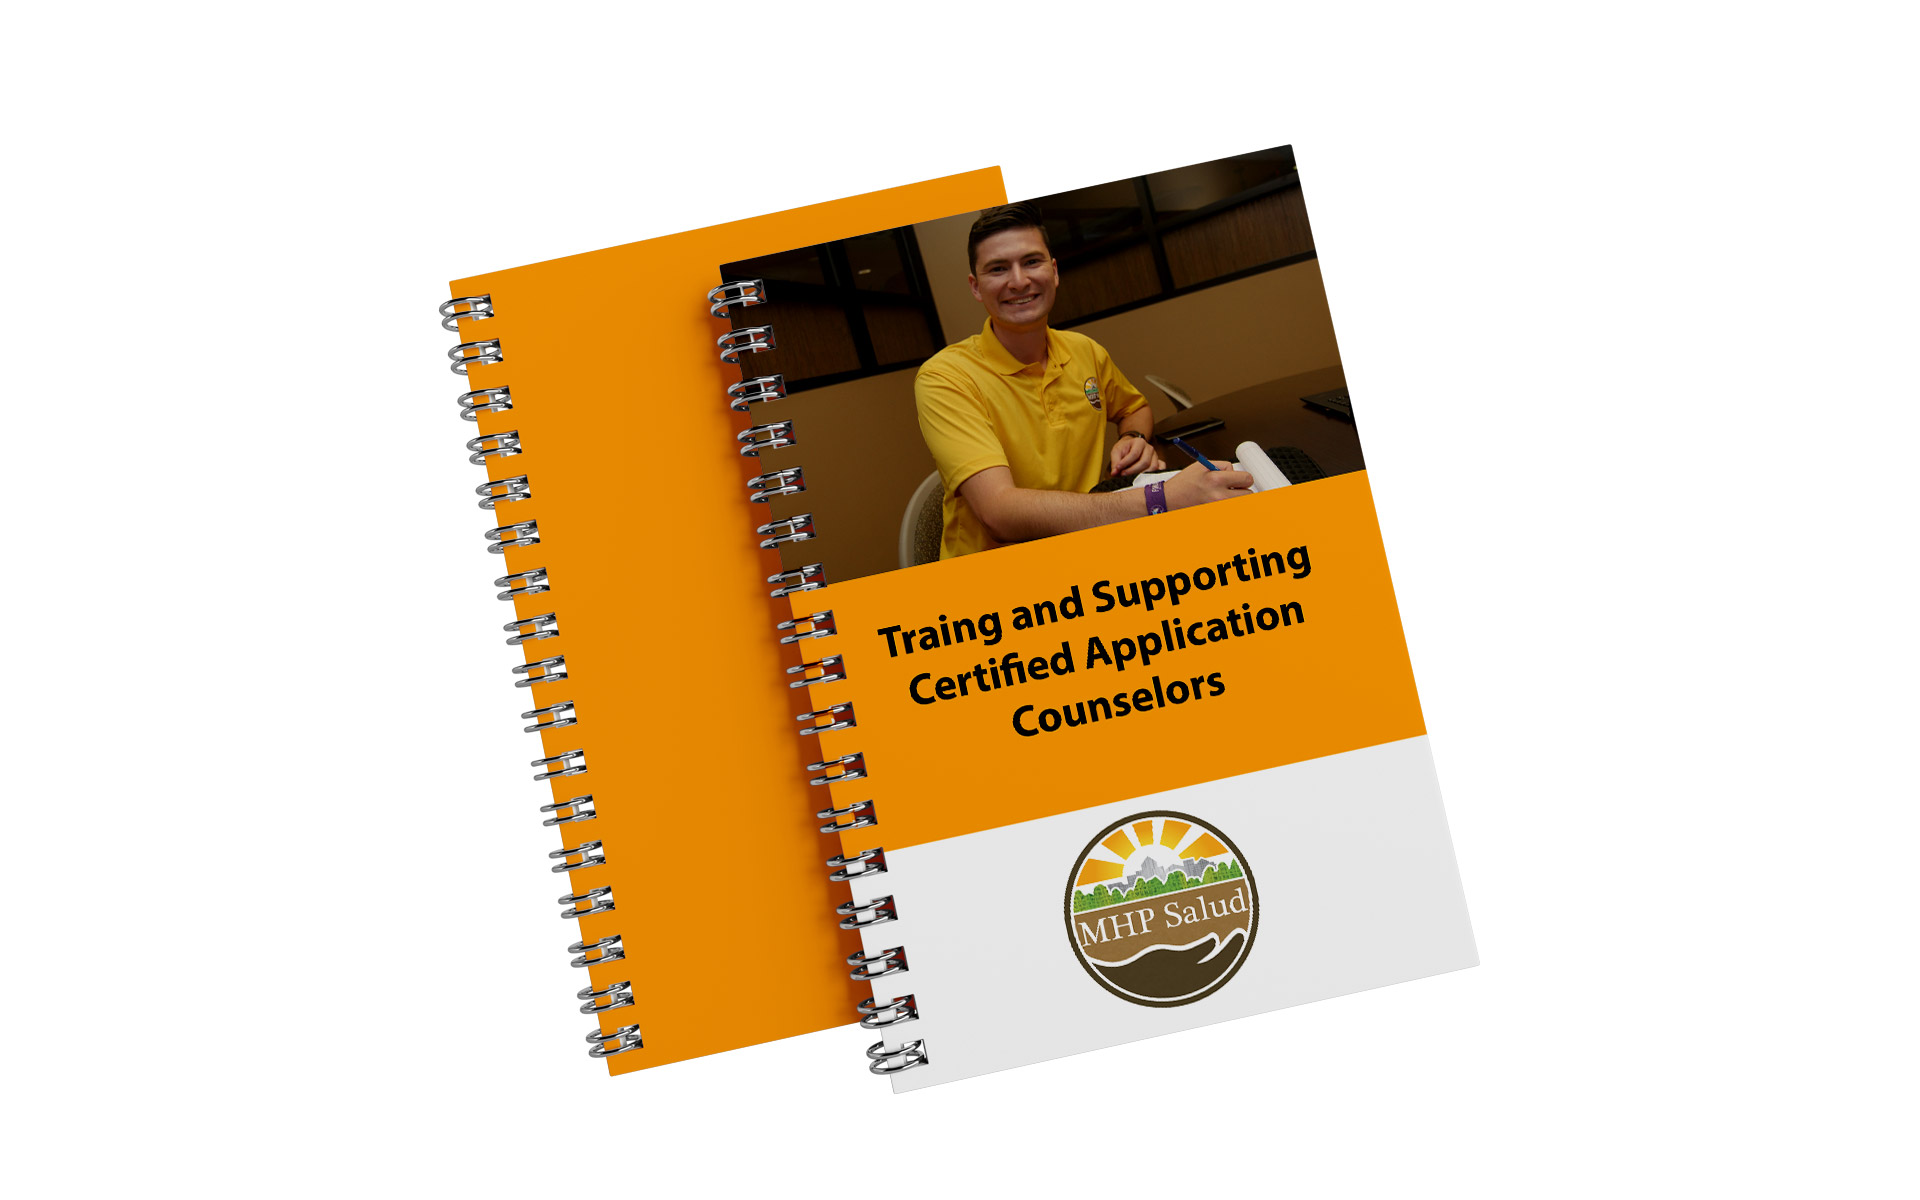 Training and Supporting Certified Application Counselors booklet.